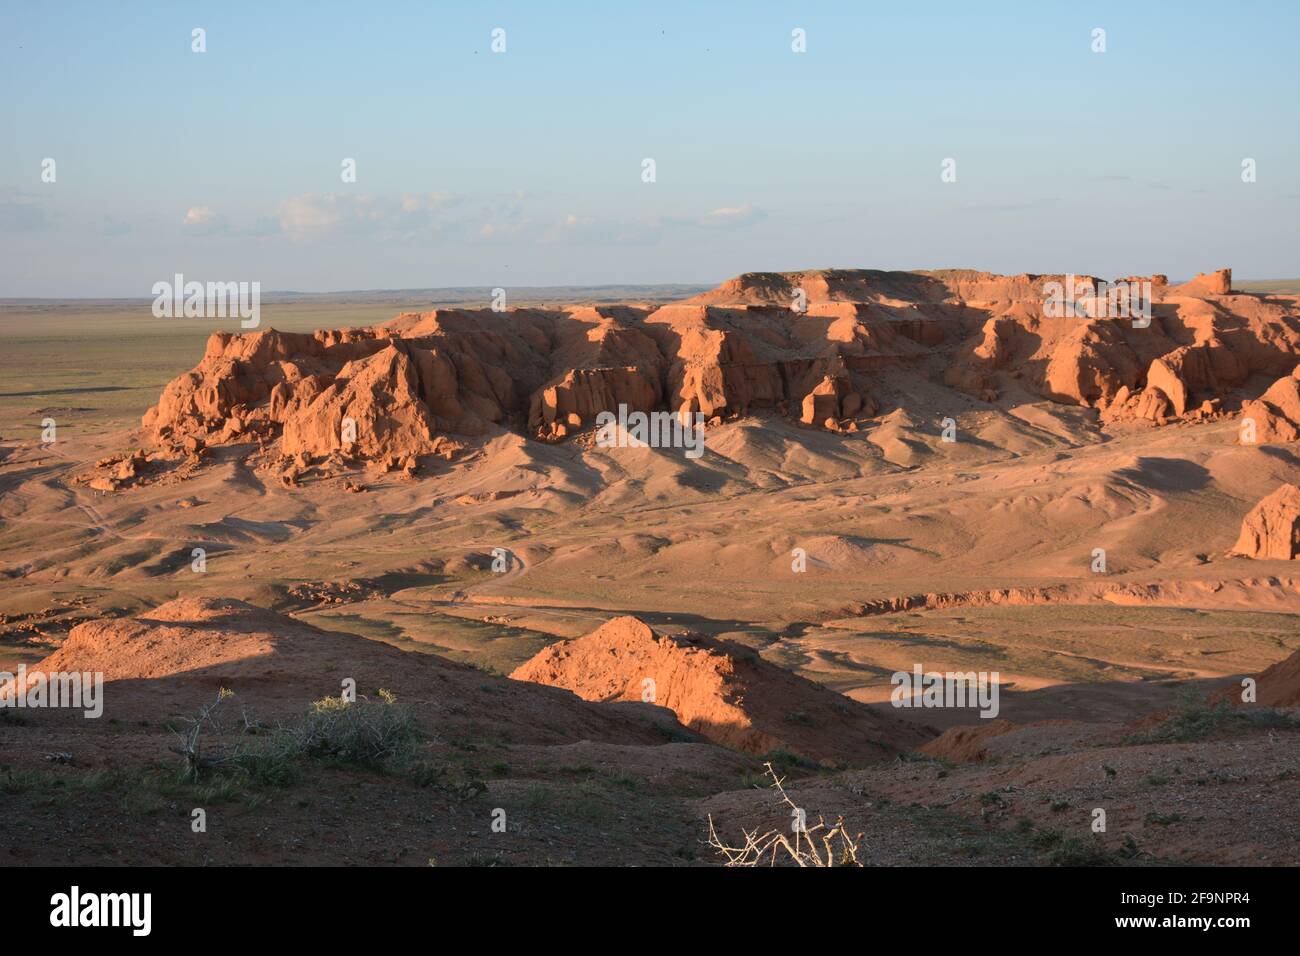 The Bayanzag / Flaming Cliffs area of the Gobi Desert in the Ömnögovi Province of Mongolia, where important fossil finds have been made. Stock Photo